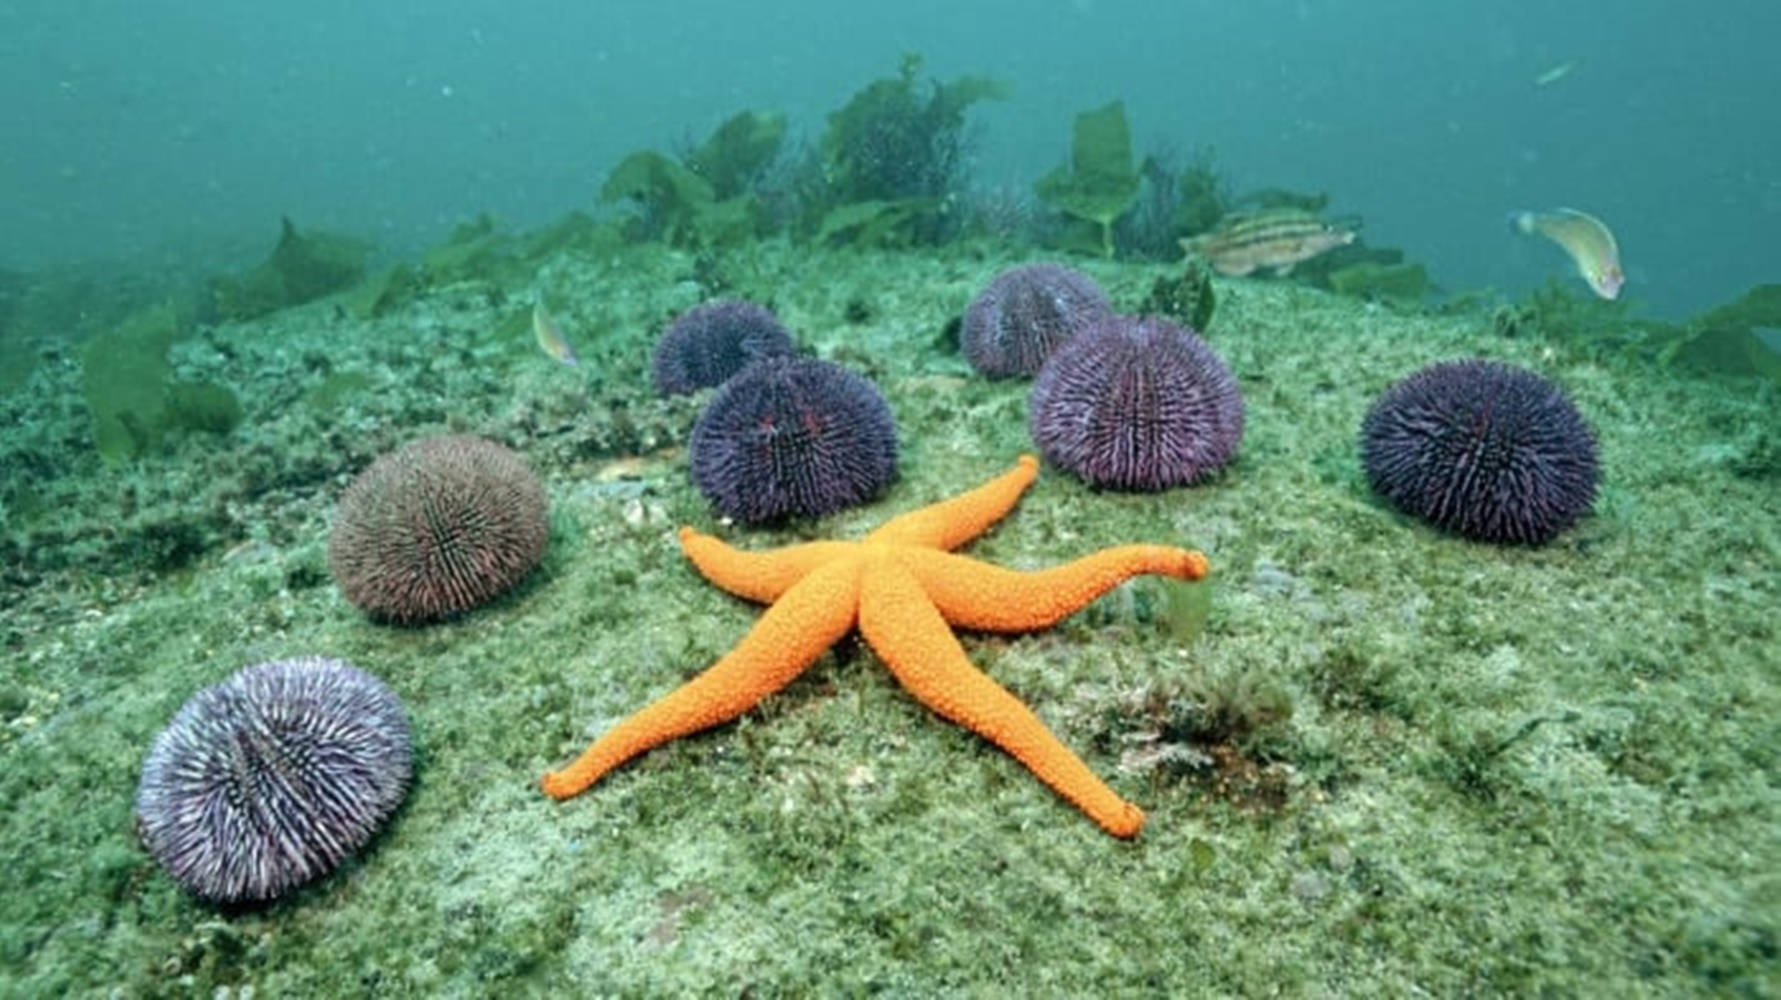 Starfish and sea urchins are common sights in the waters off the coast of the Channel Islands. - Starfish